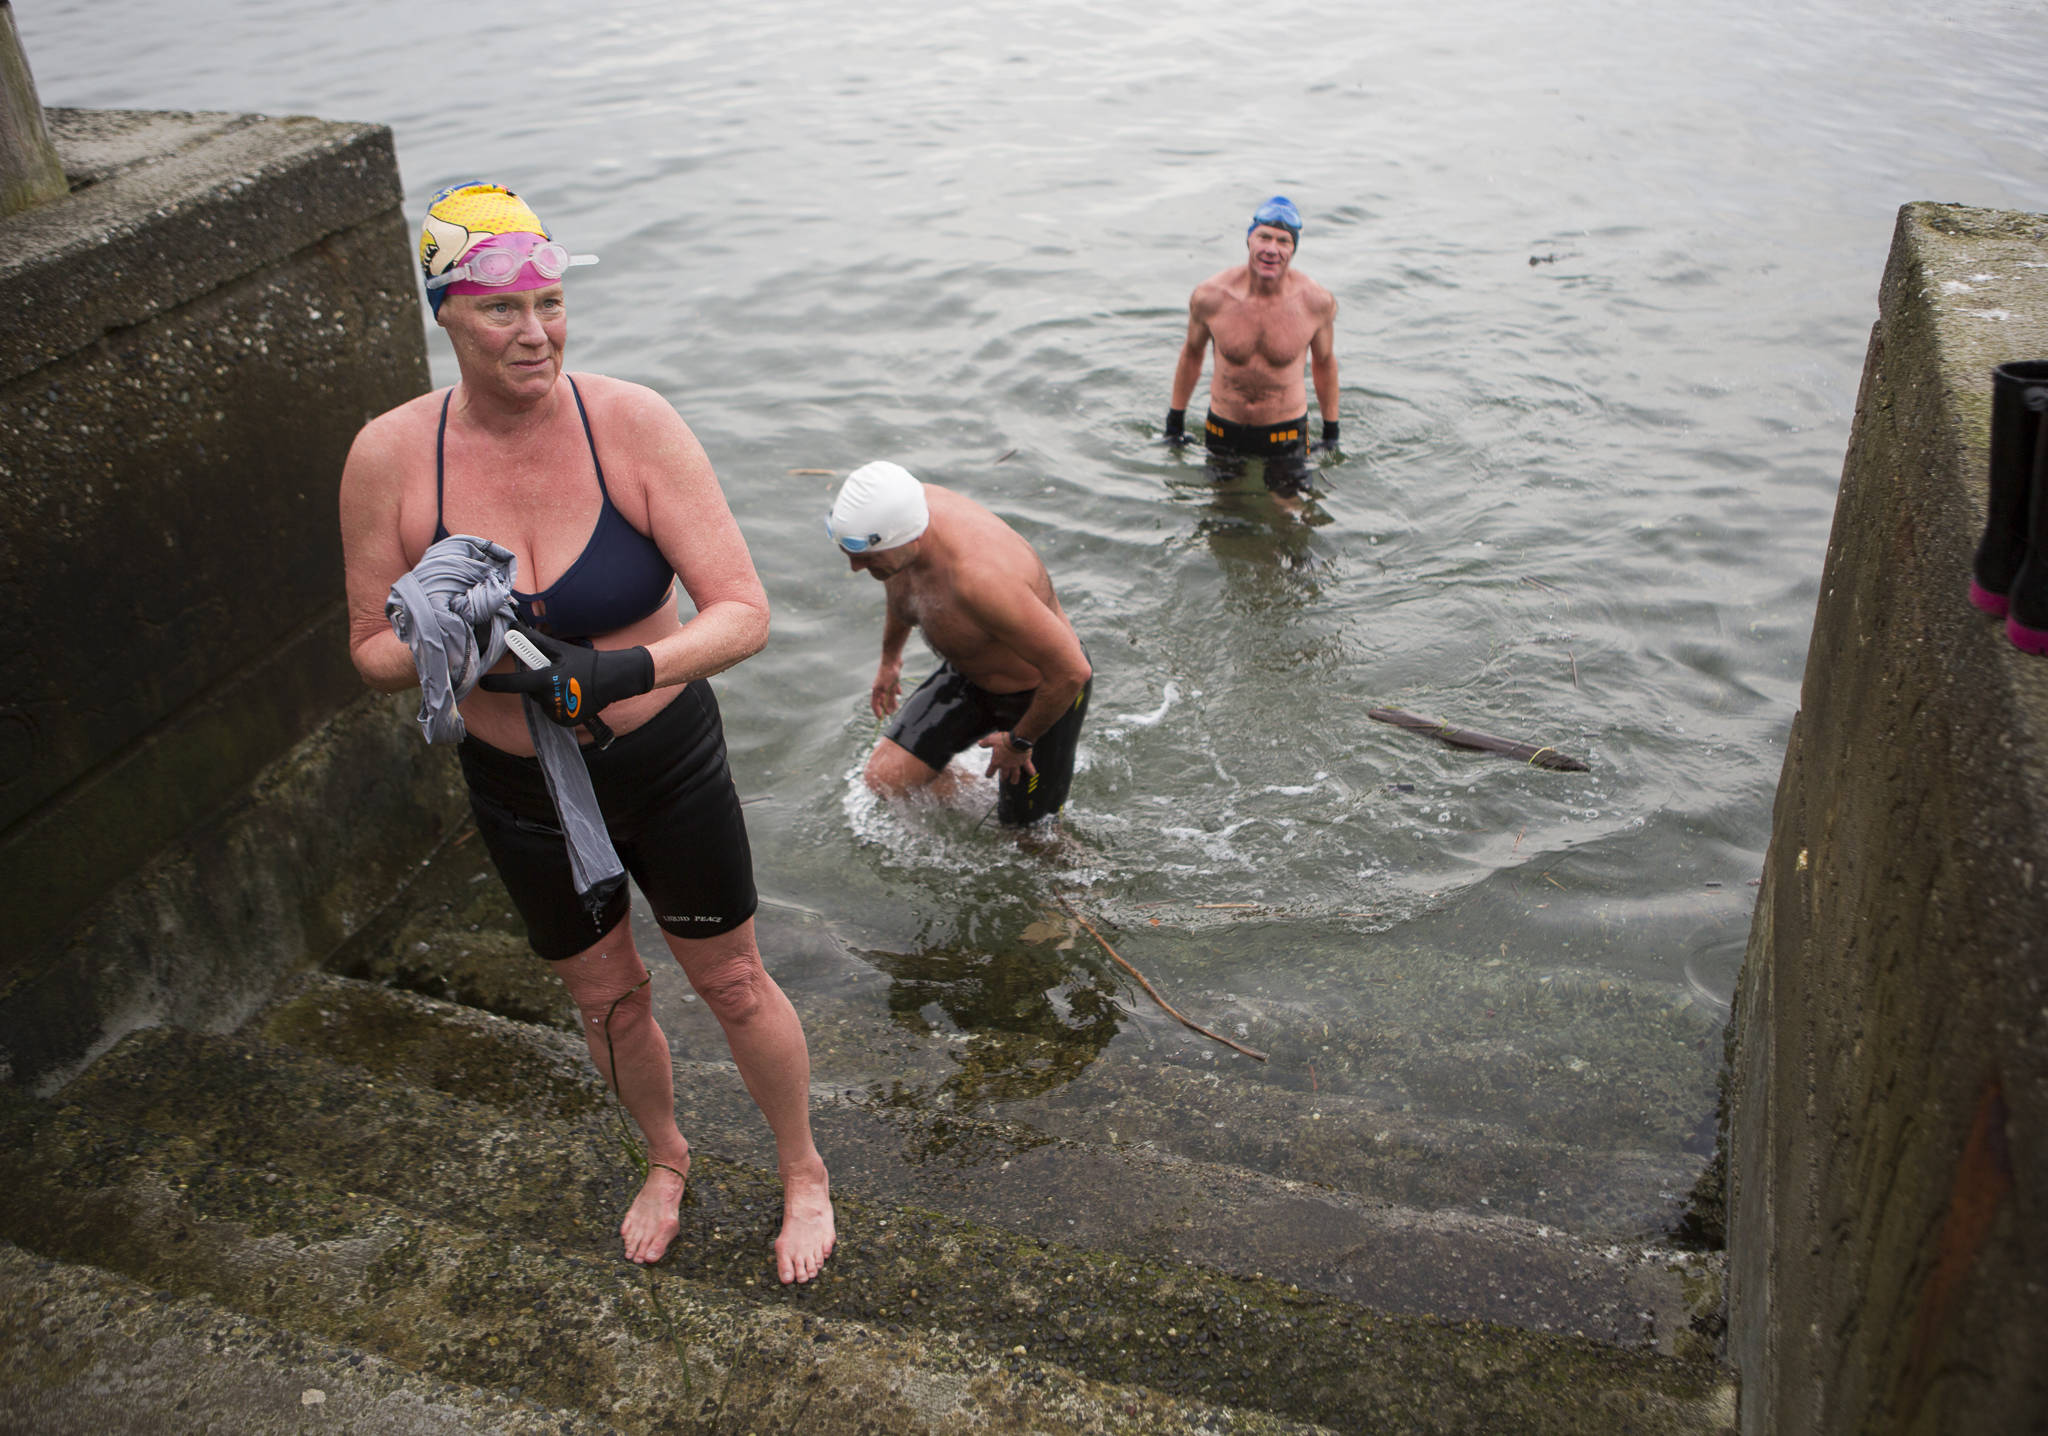 Photos by Olivia Vanni/The Everett Herald
Kristin Galbreaith, left, Joe Hempel and Brian McCleary make their way out of the water at Seawall Park in Langley. Photo below: Joe Hempel, right, and Kristina Galbreaith finish their swim from Seawall Park on Friday, Jan. 29,